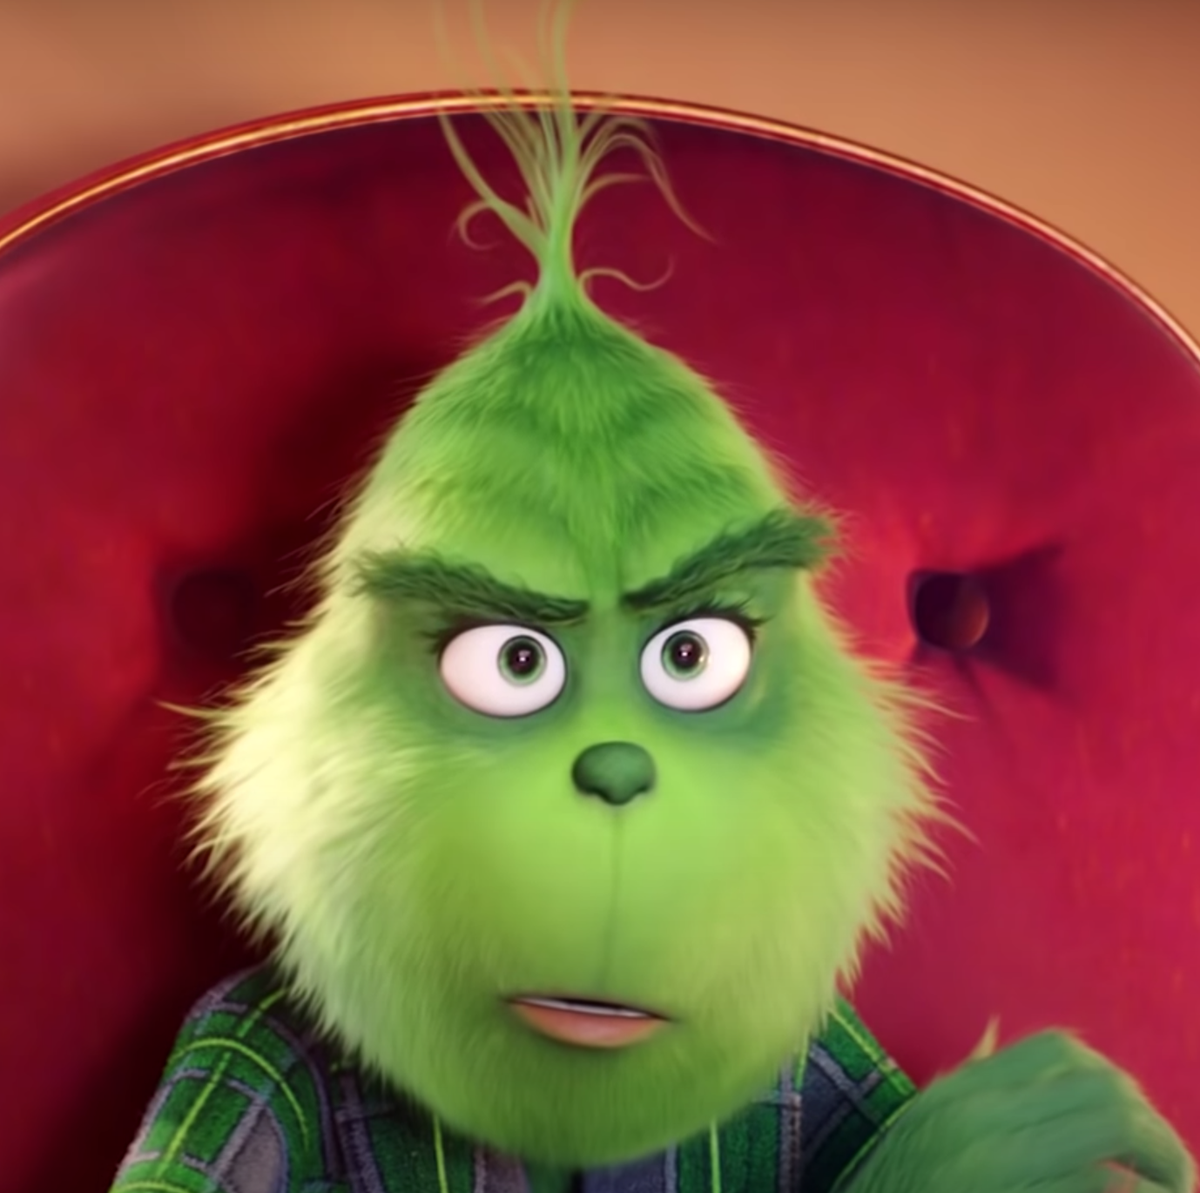 Is 'The Grinch' on Netflix? - How to Watch 'The Grinch' 2018 Animated Movie